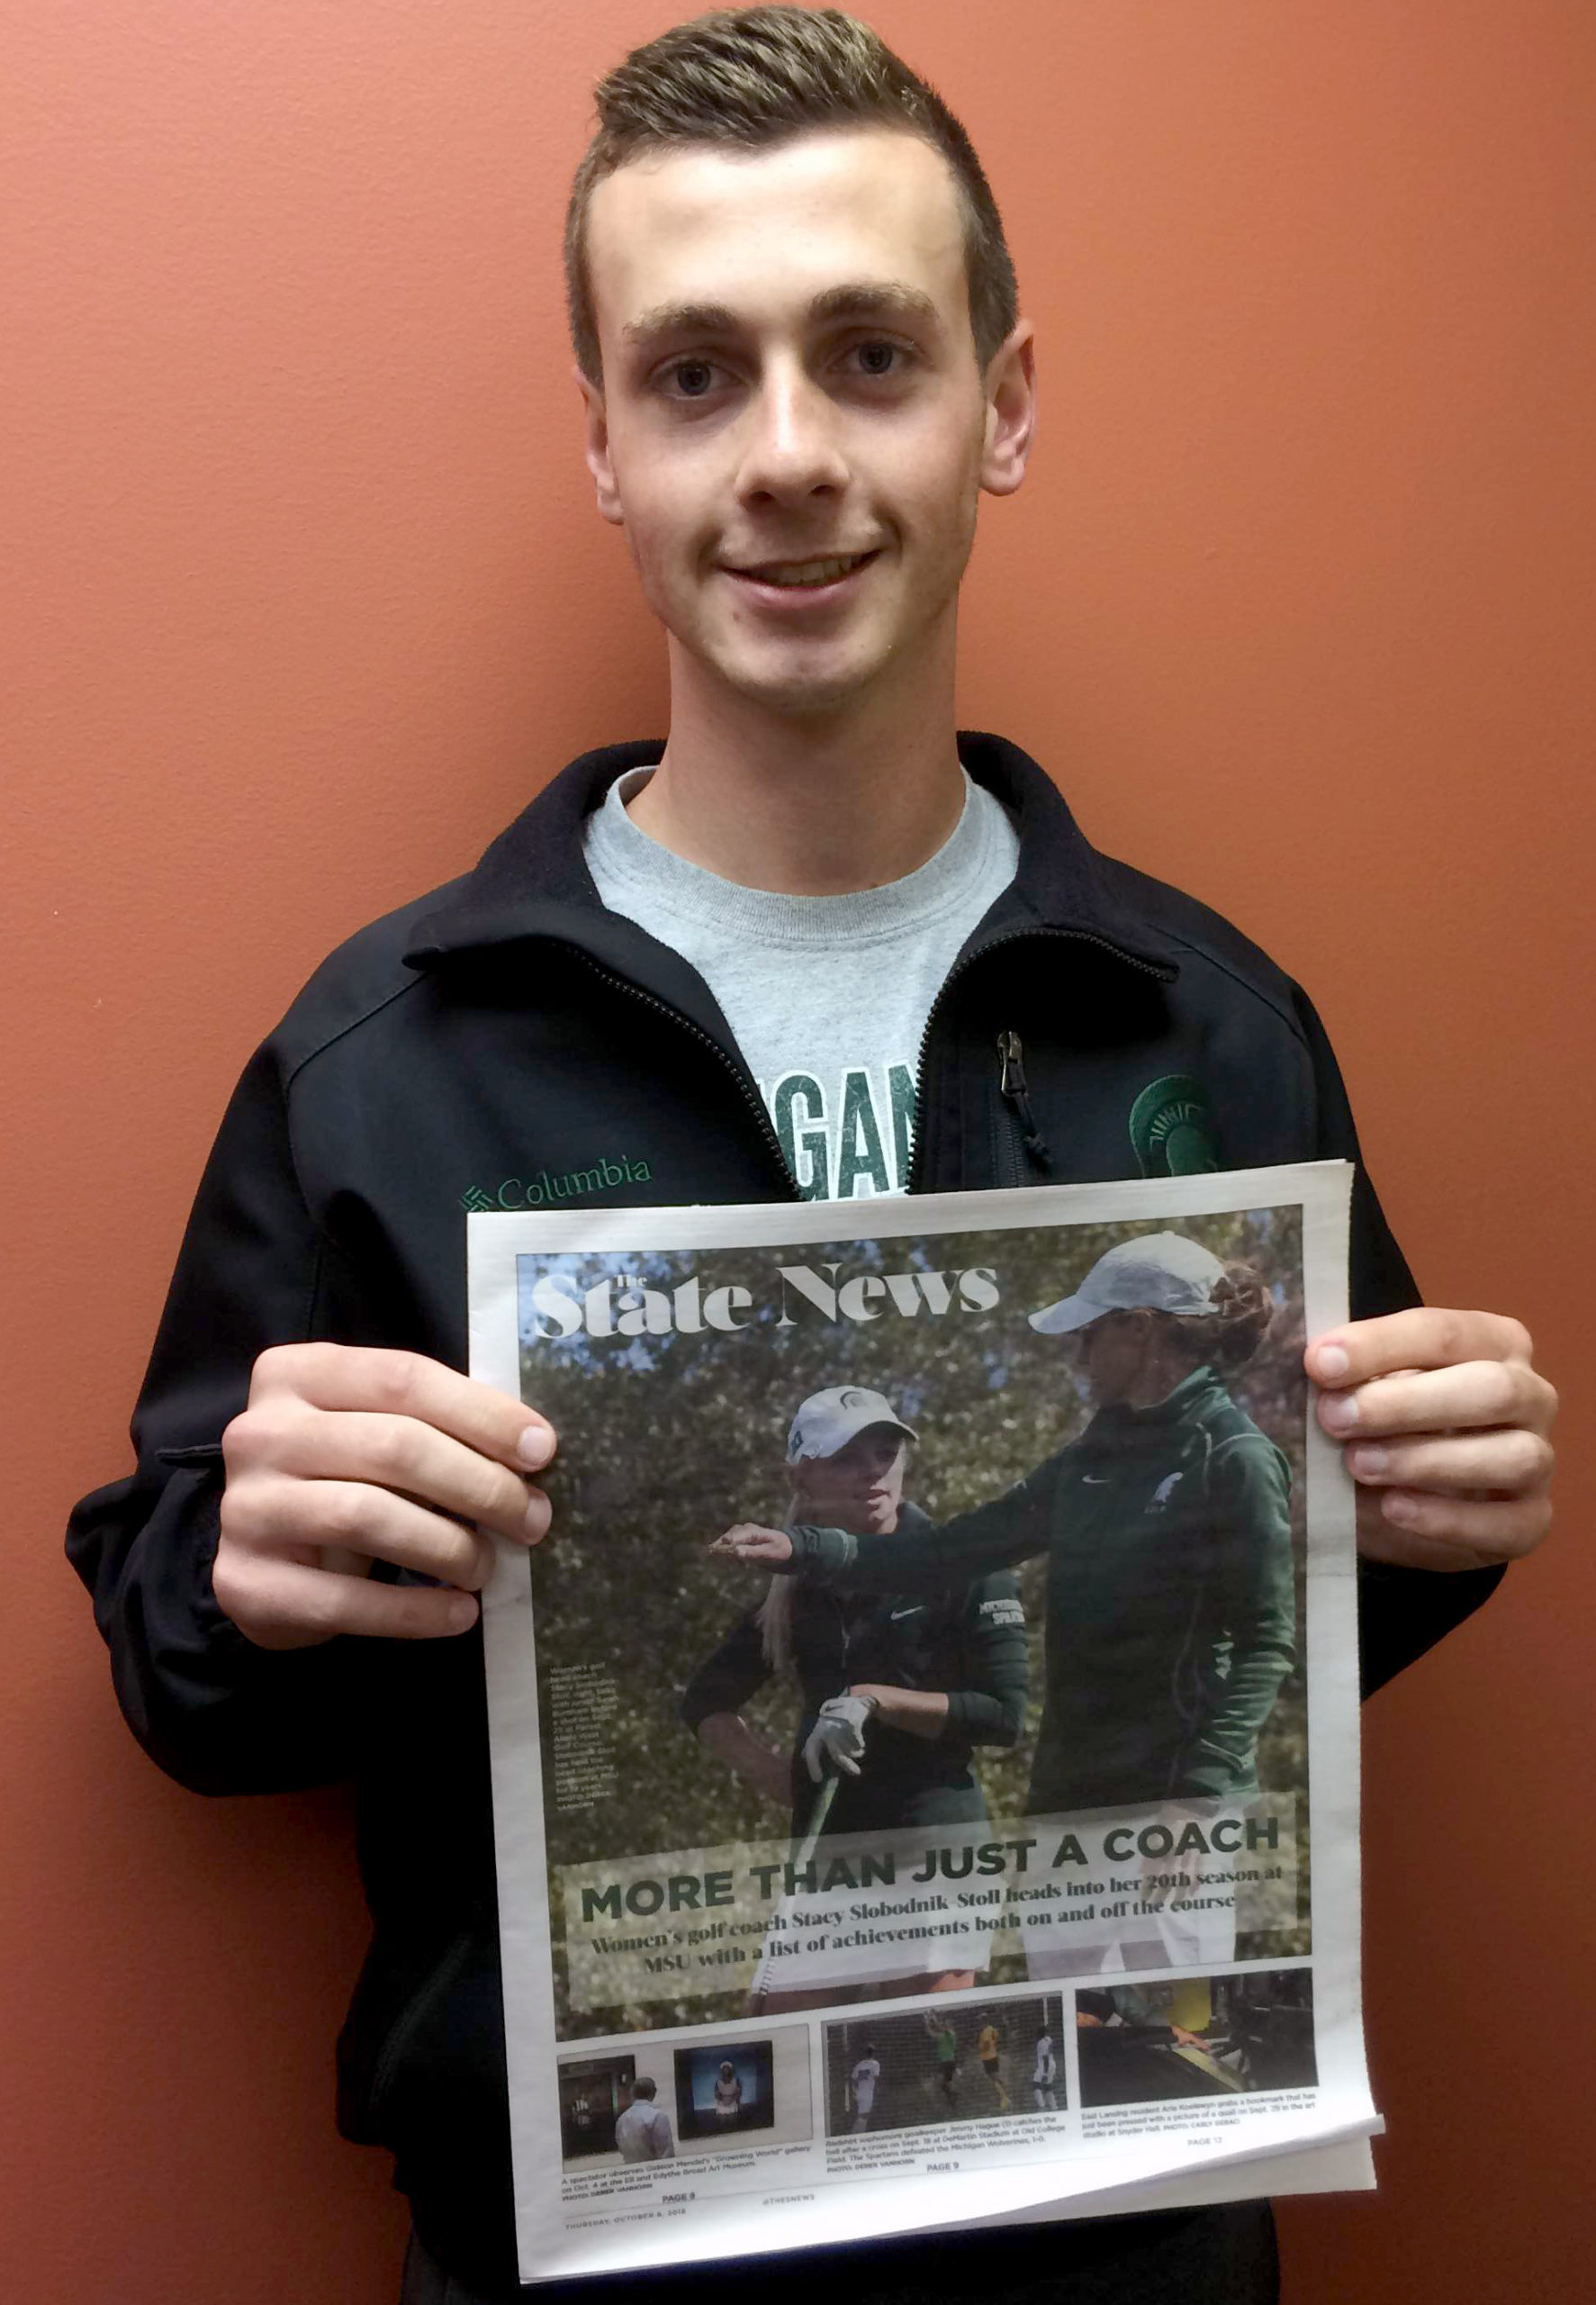 Jake Allen is the 2016-17 editor of The State News at Michigan State University. Photo by Jaimie Bozack